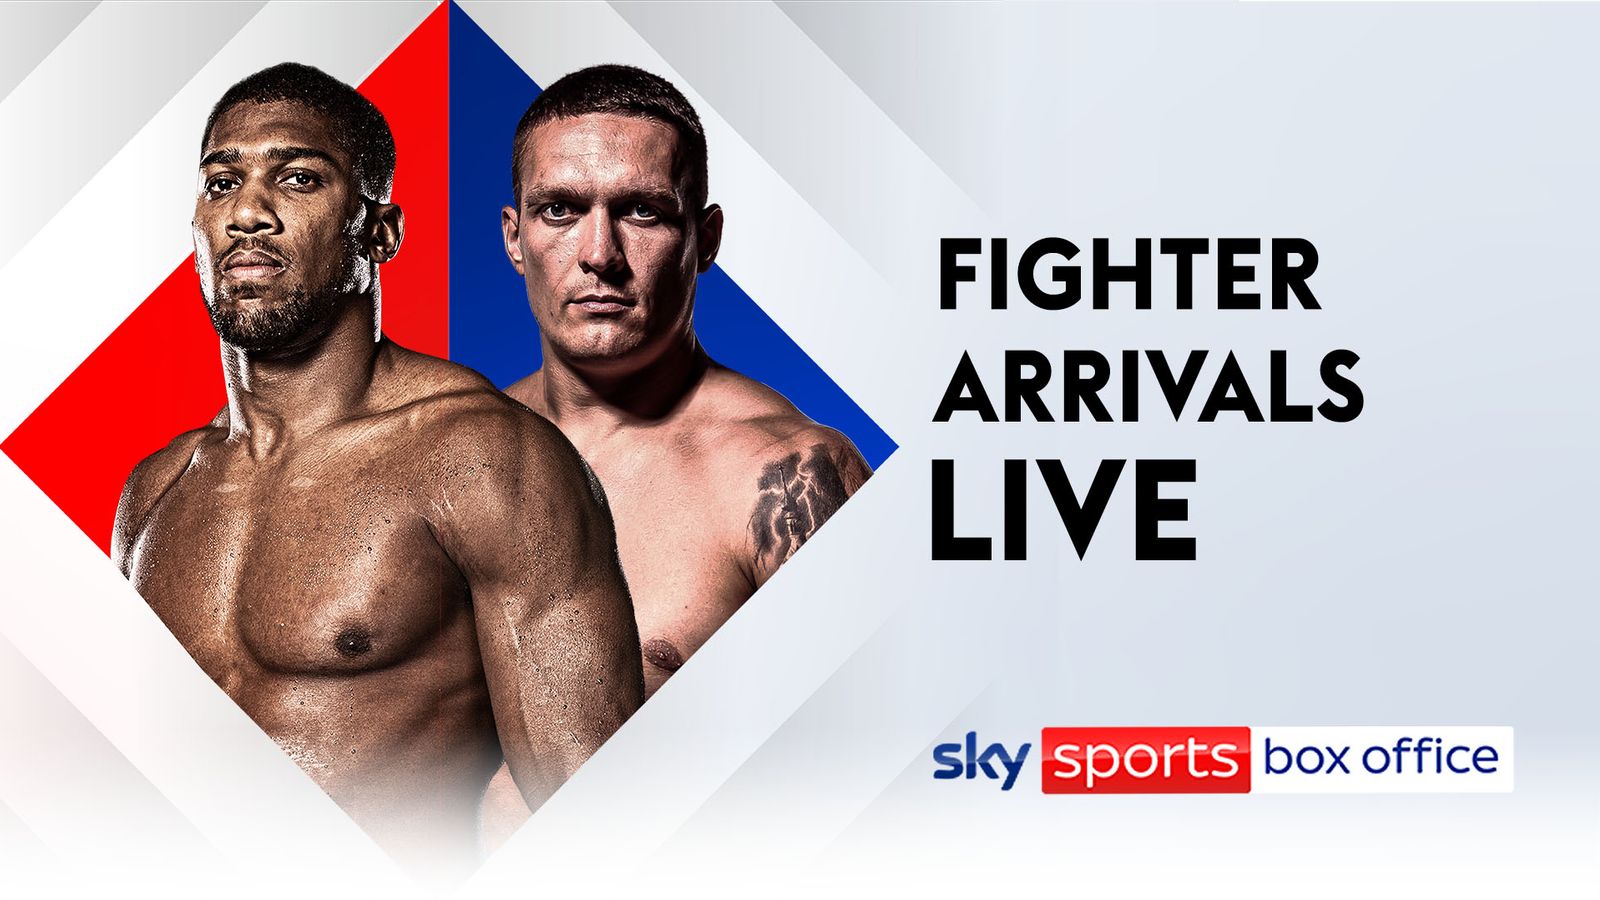 Oleksandr Usyk vs Anthony Joshua: Watch the live stream as the fighters make their grand arrivals from 4.30pm